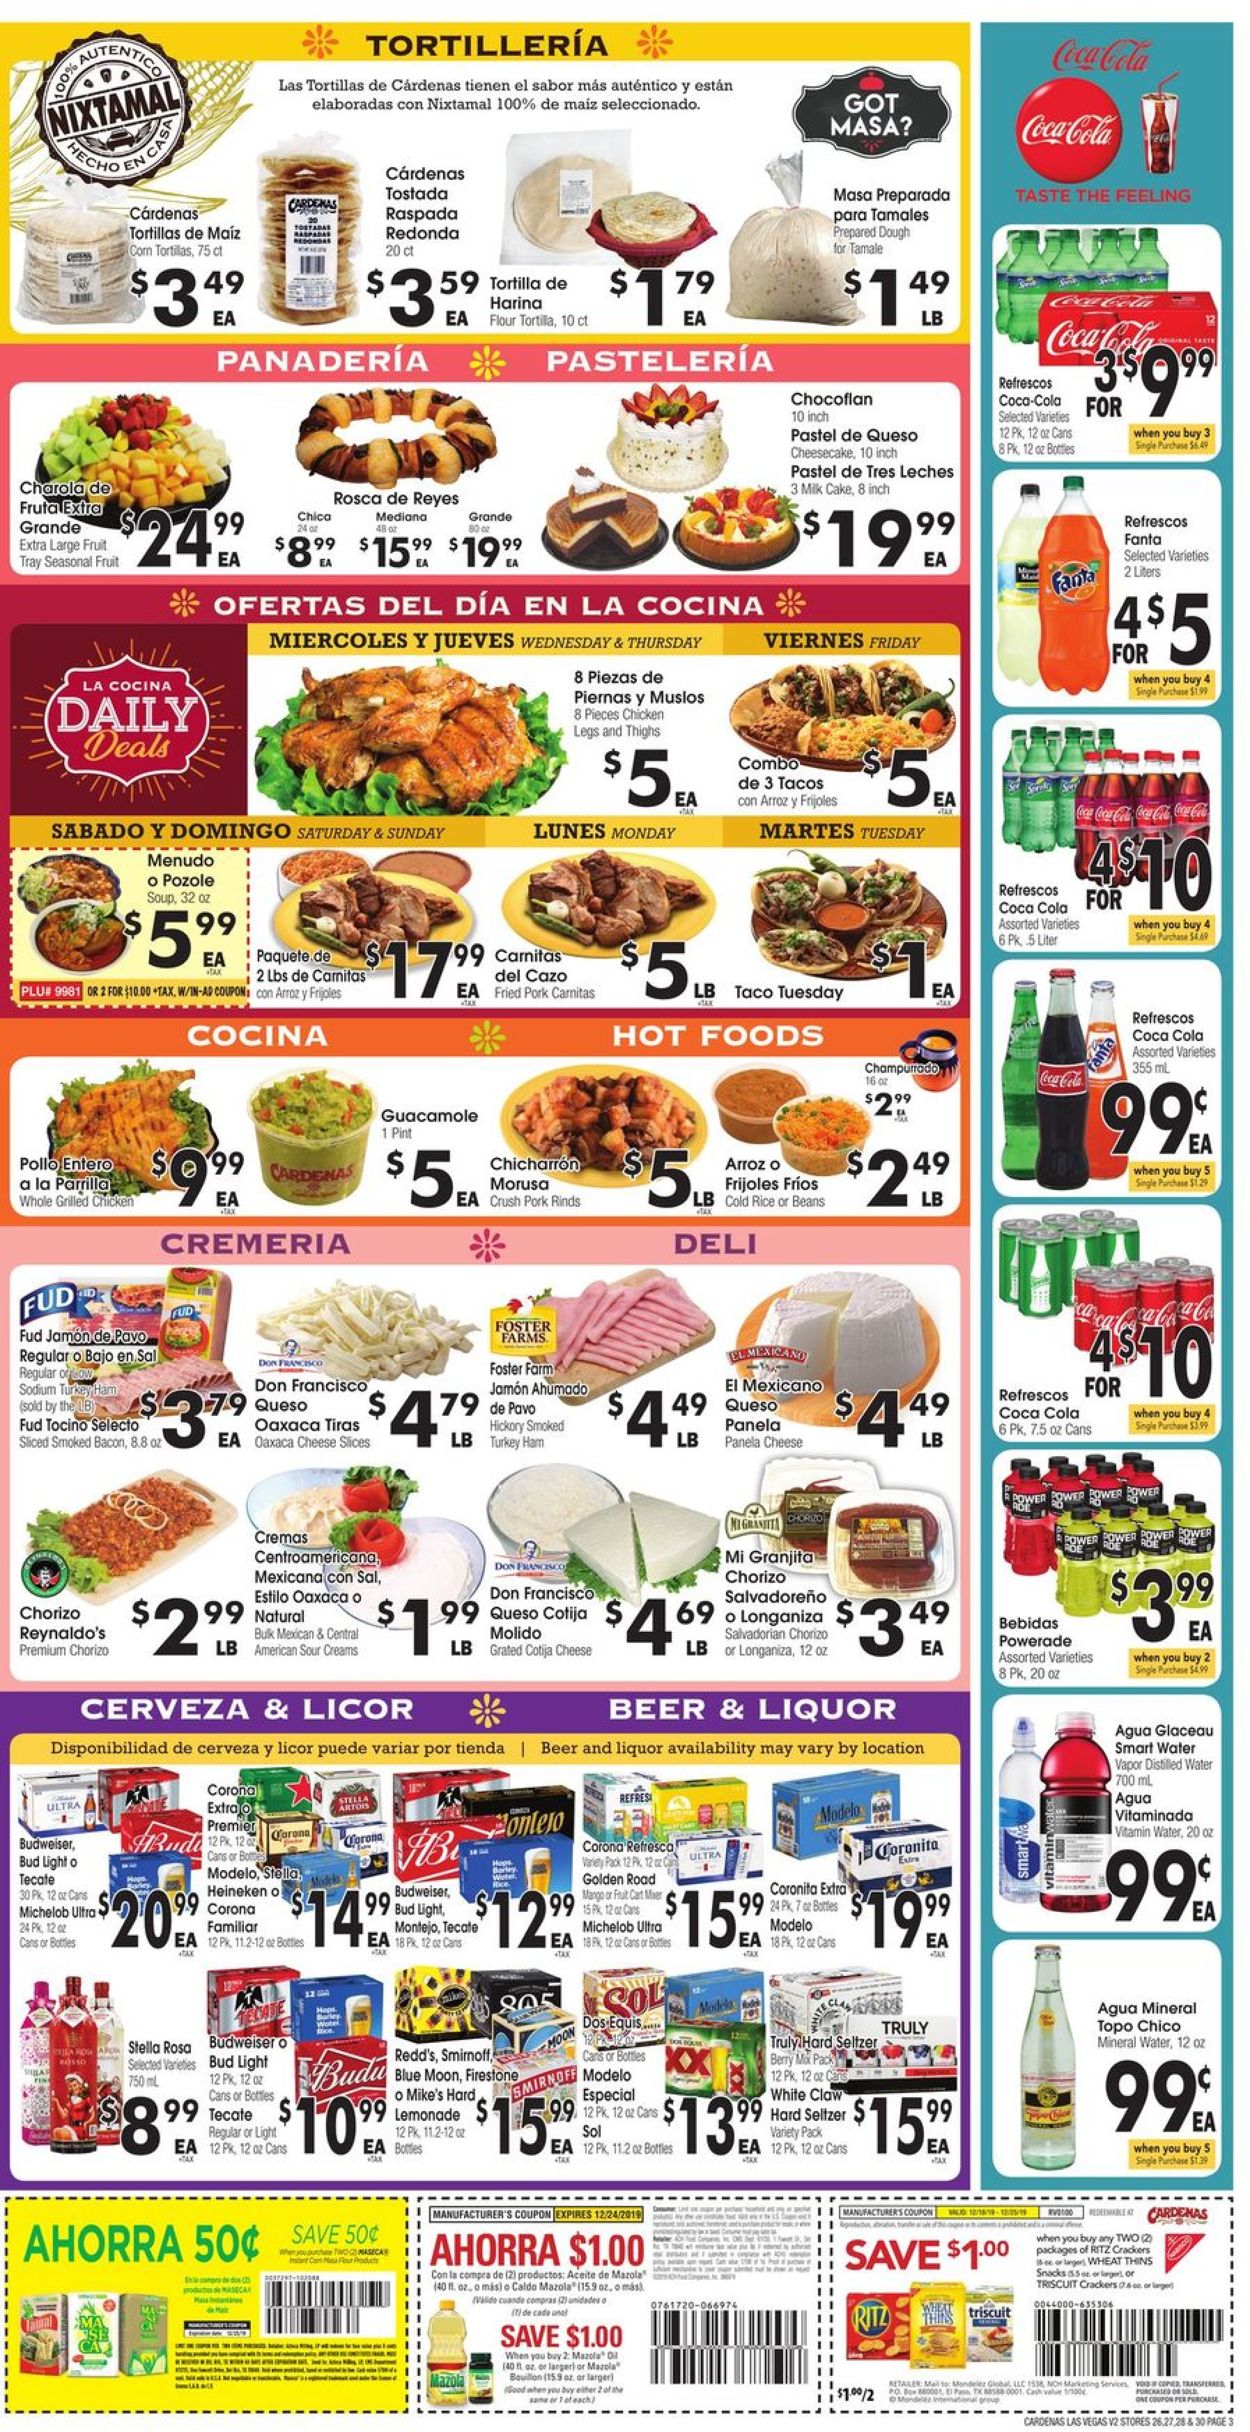 Cardenas Ad from 12/18/2019